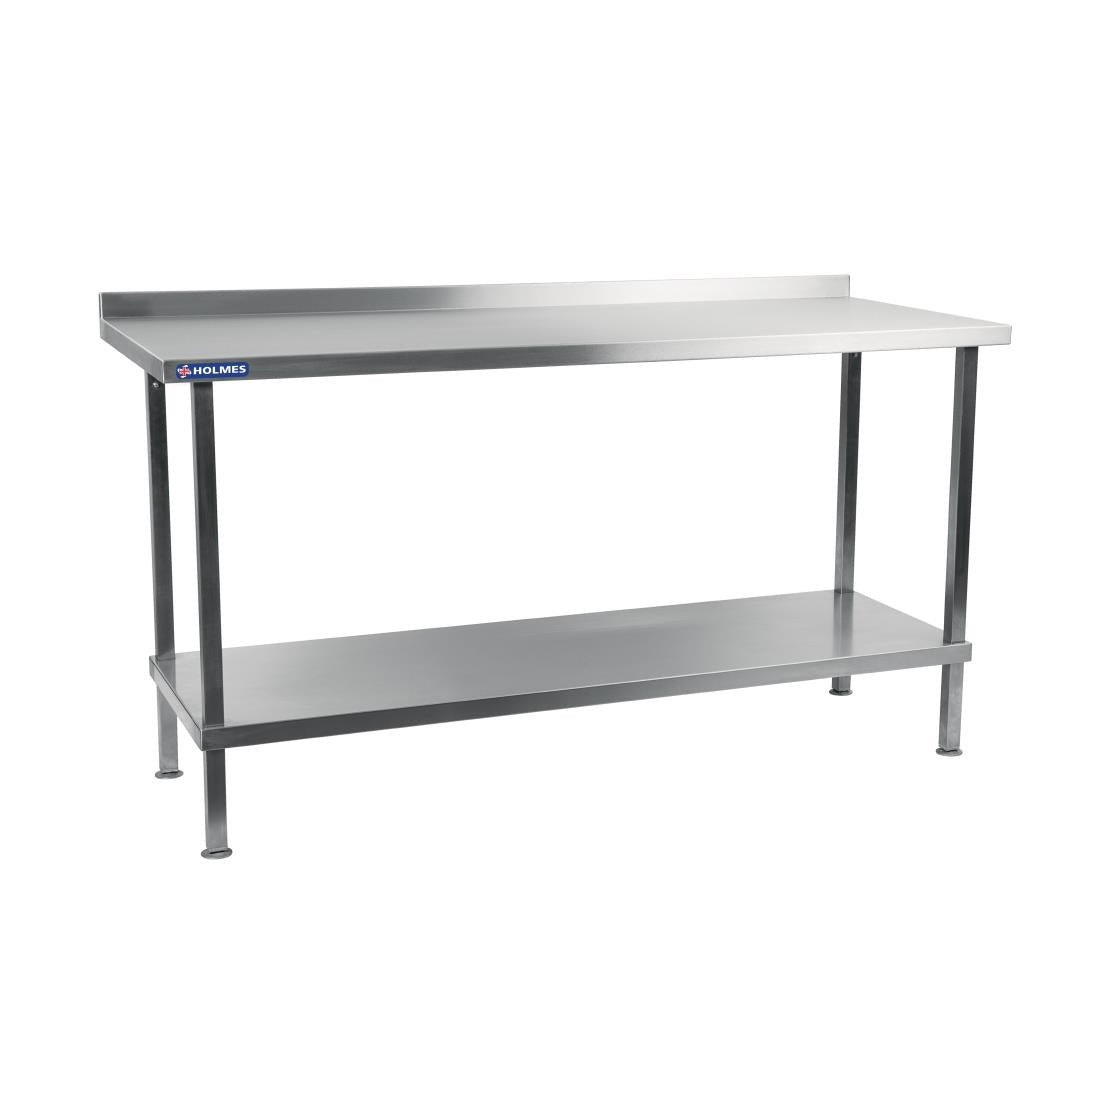 DR039 Holmes Stainless Steel Wall Table 2100mm JD Catering Equipment Solutions Ltd